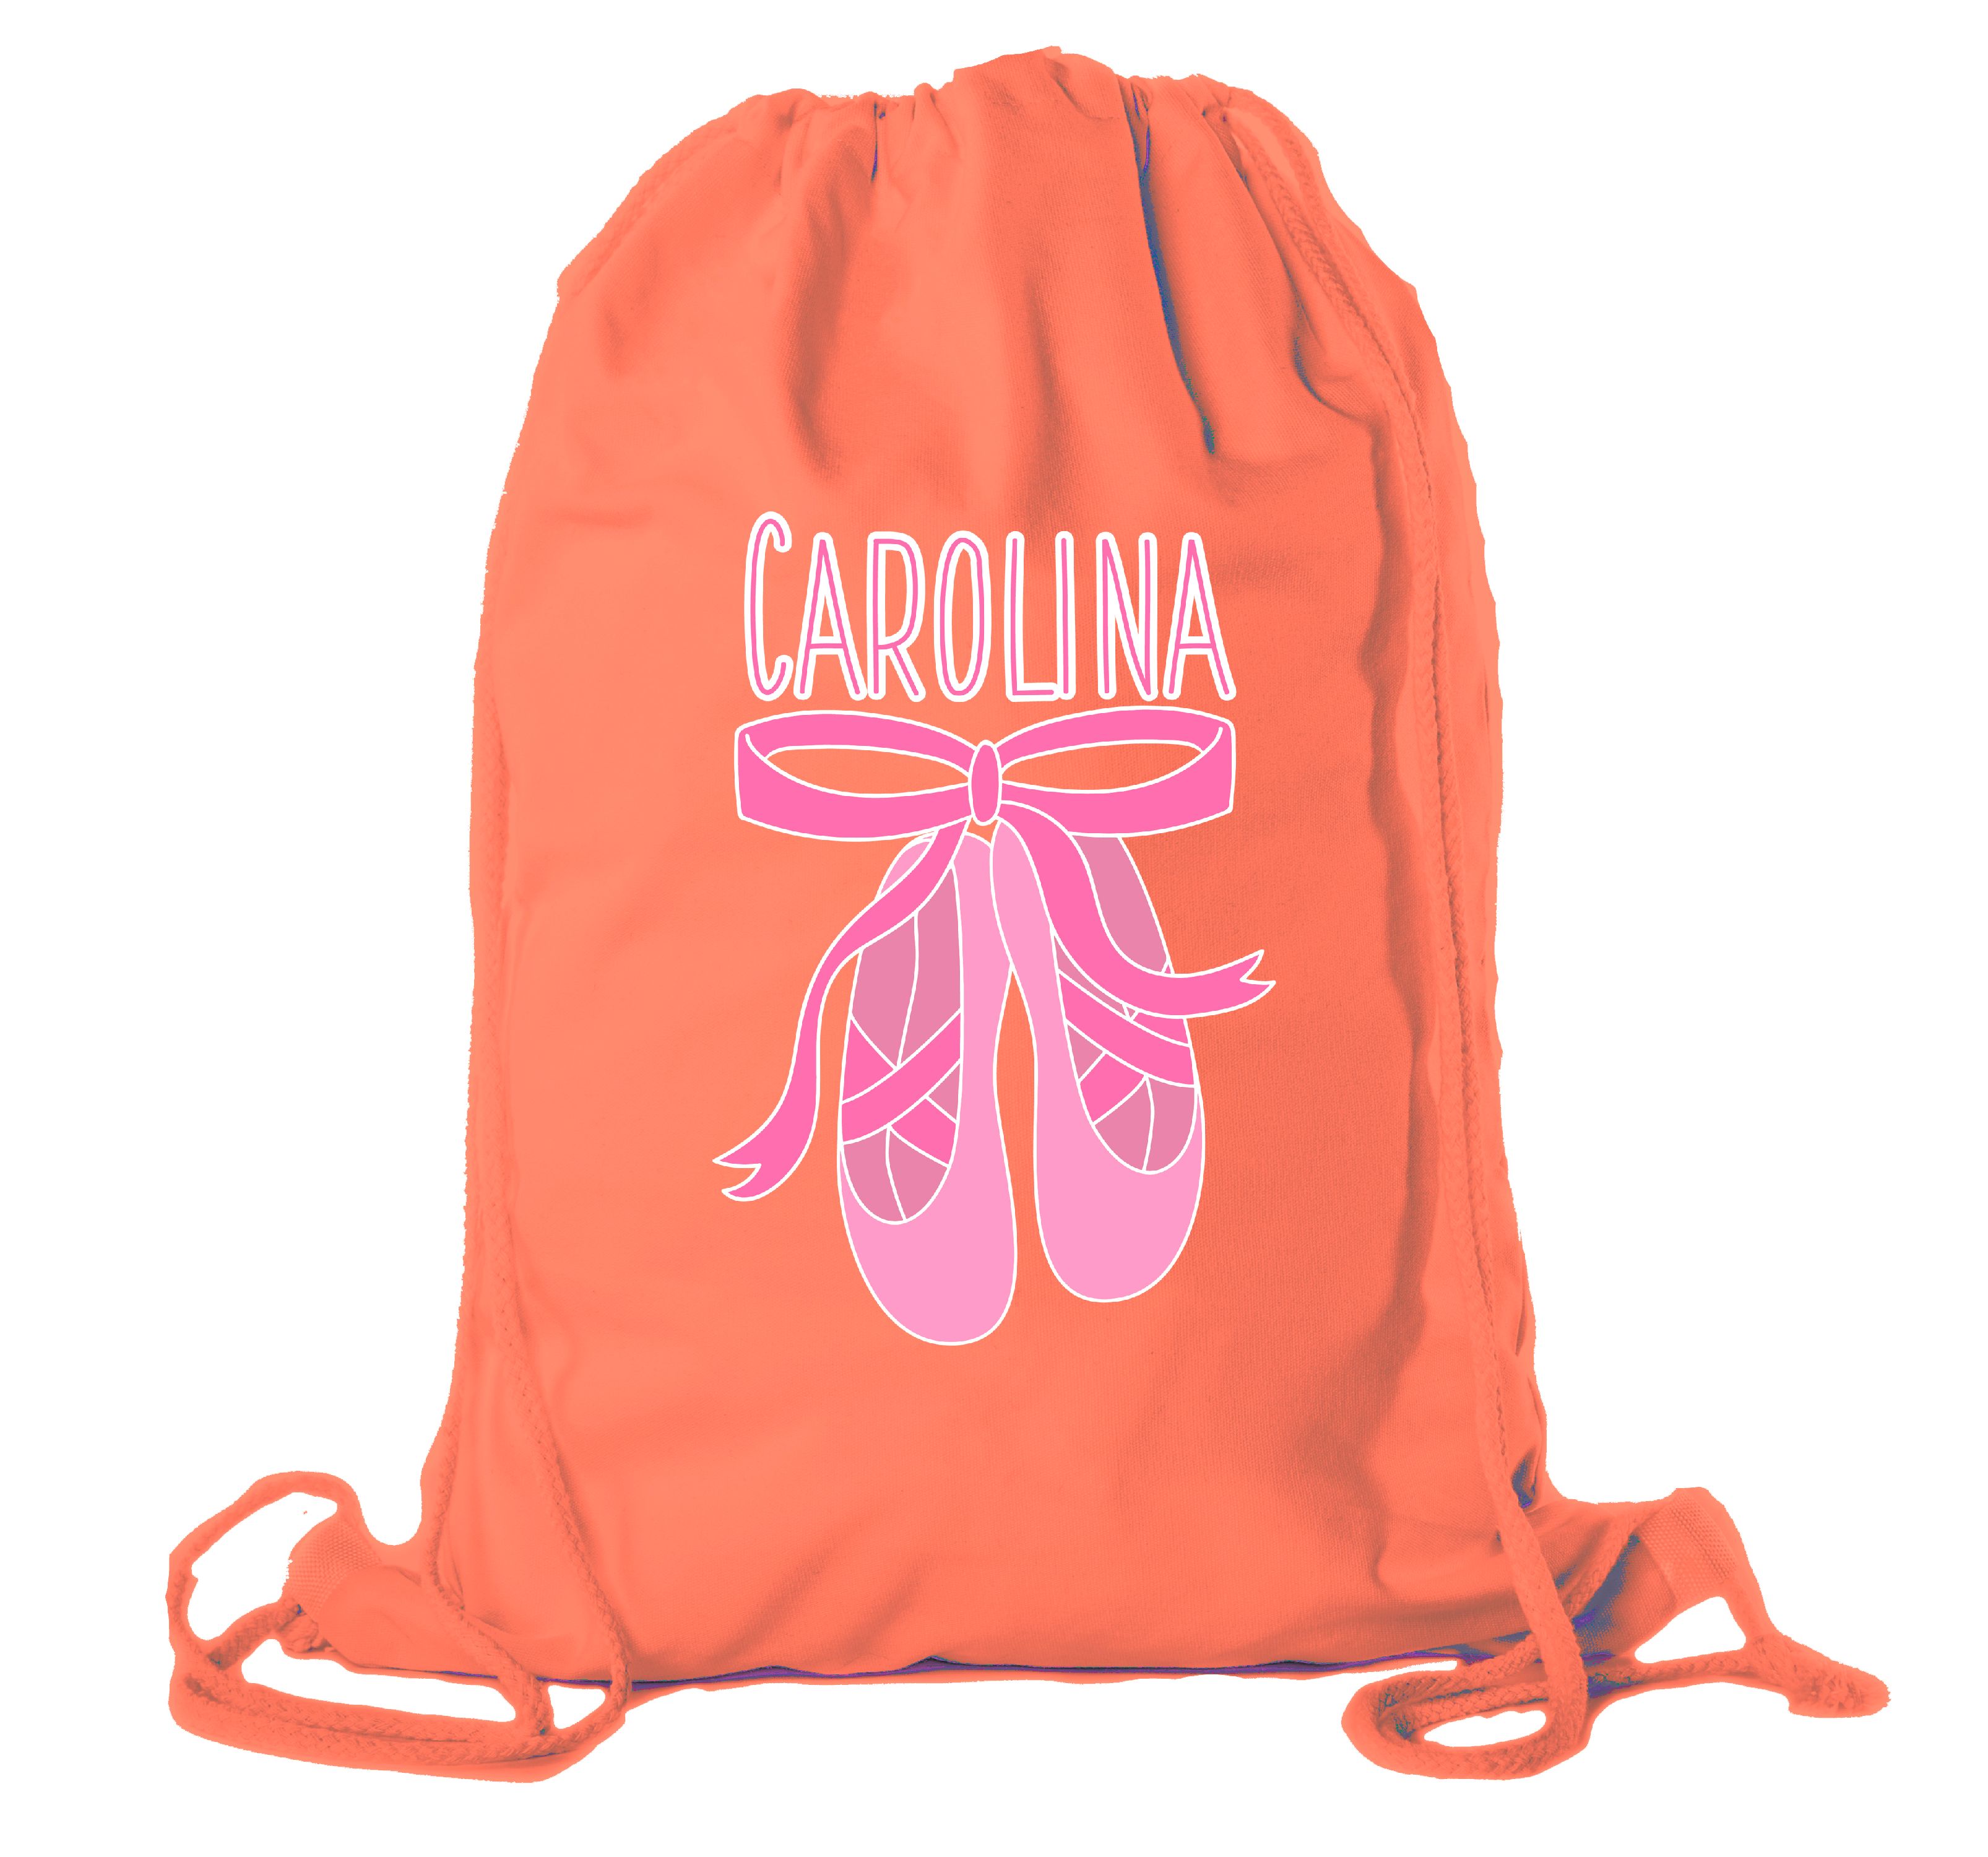 Personalized Dance Bags, Ballet Drawstring Backpack, Dance Backpacks for Girls - image 1 of 2